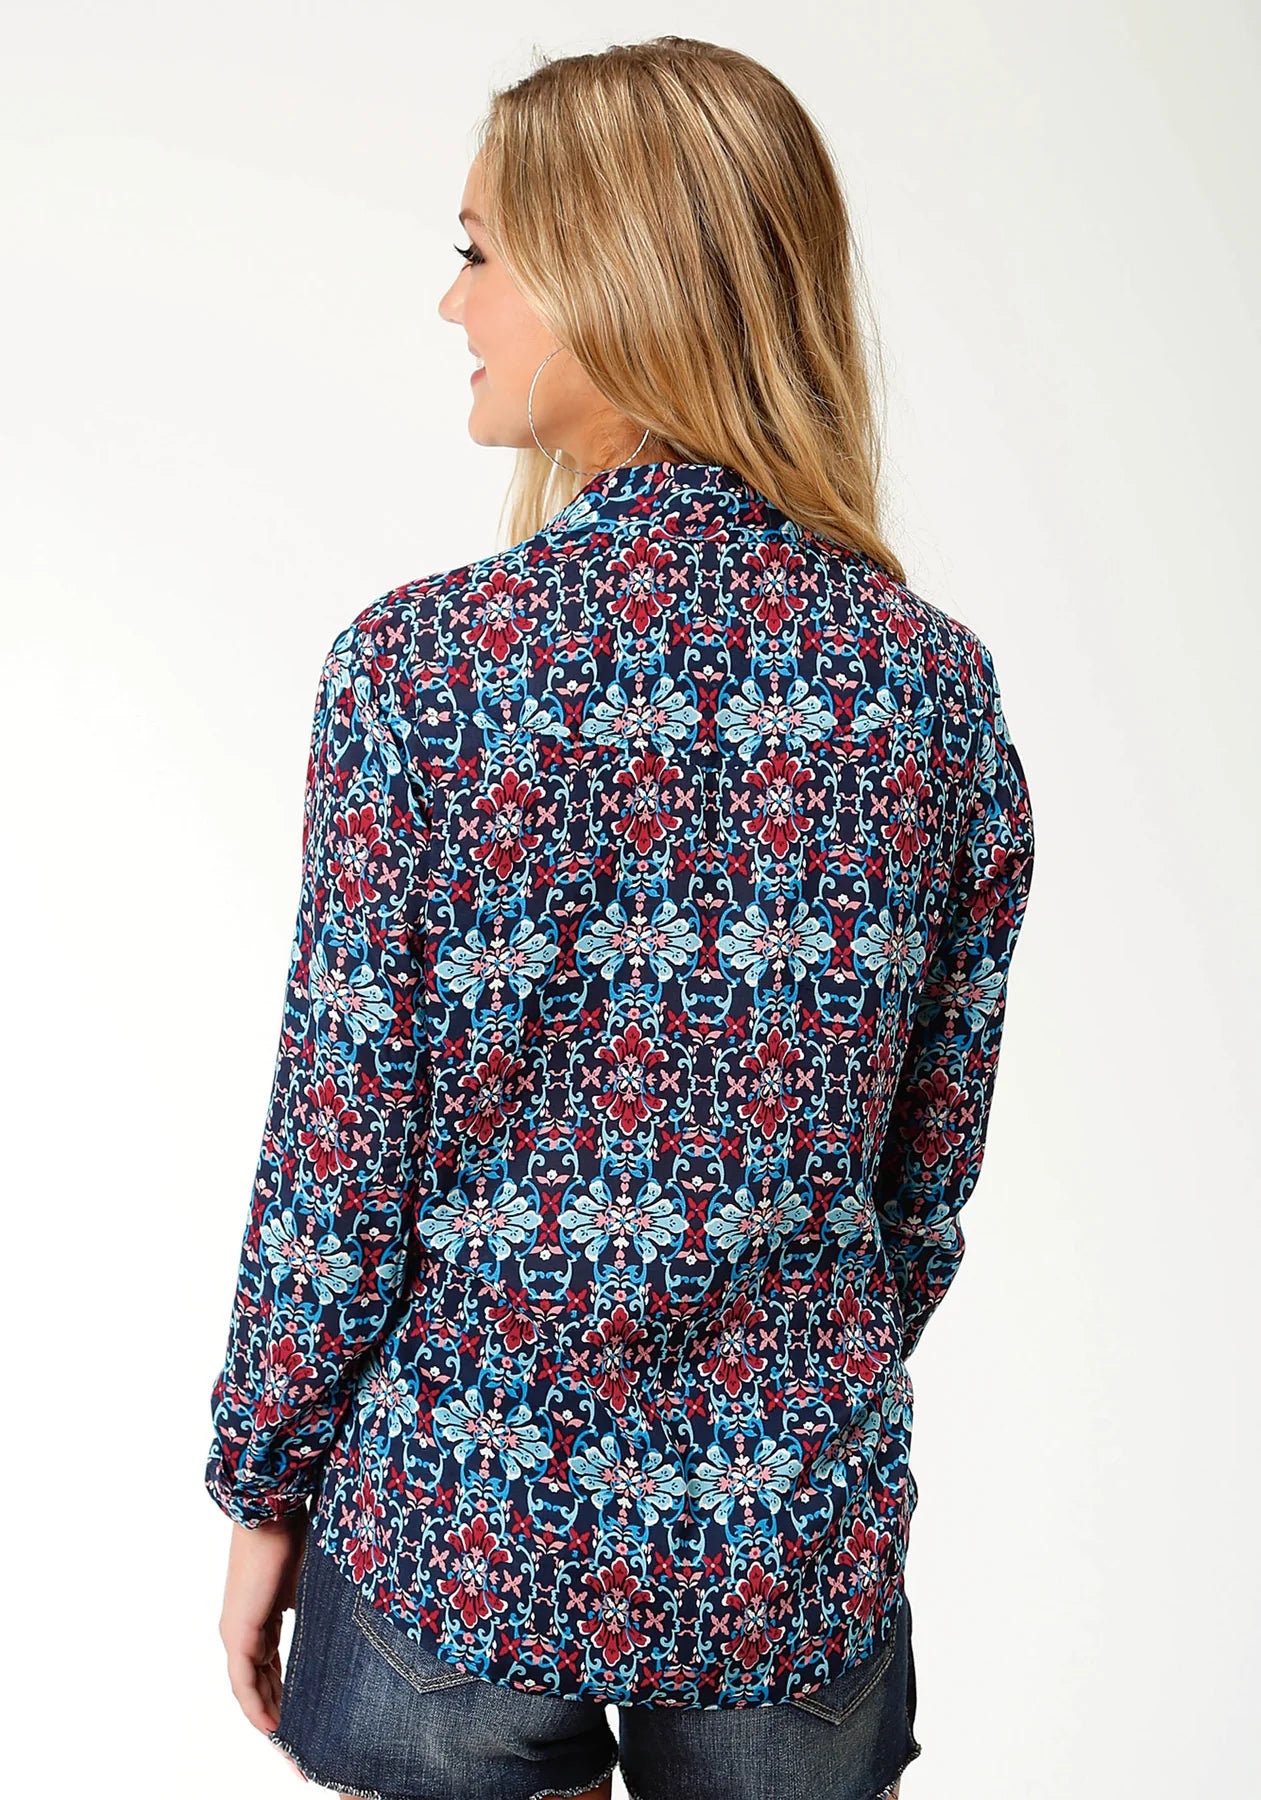 Roper Women's - Five Star Collection Shirt- Printed Rayon Western Blouse